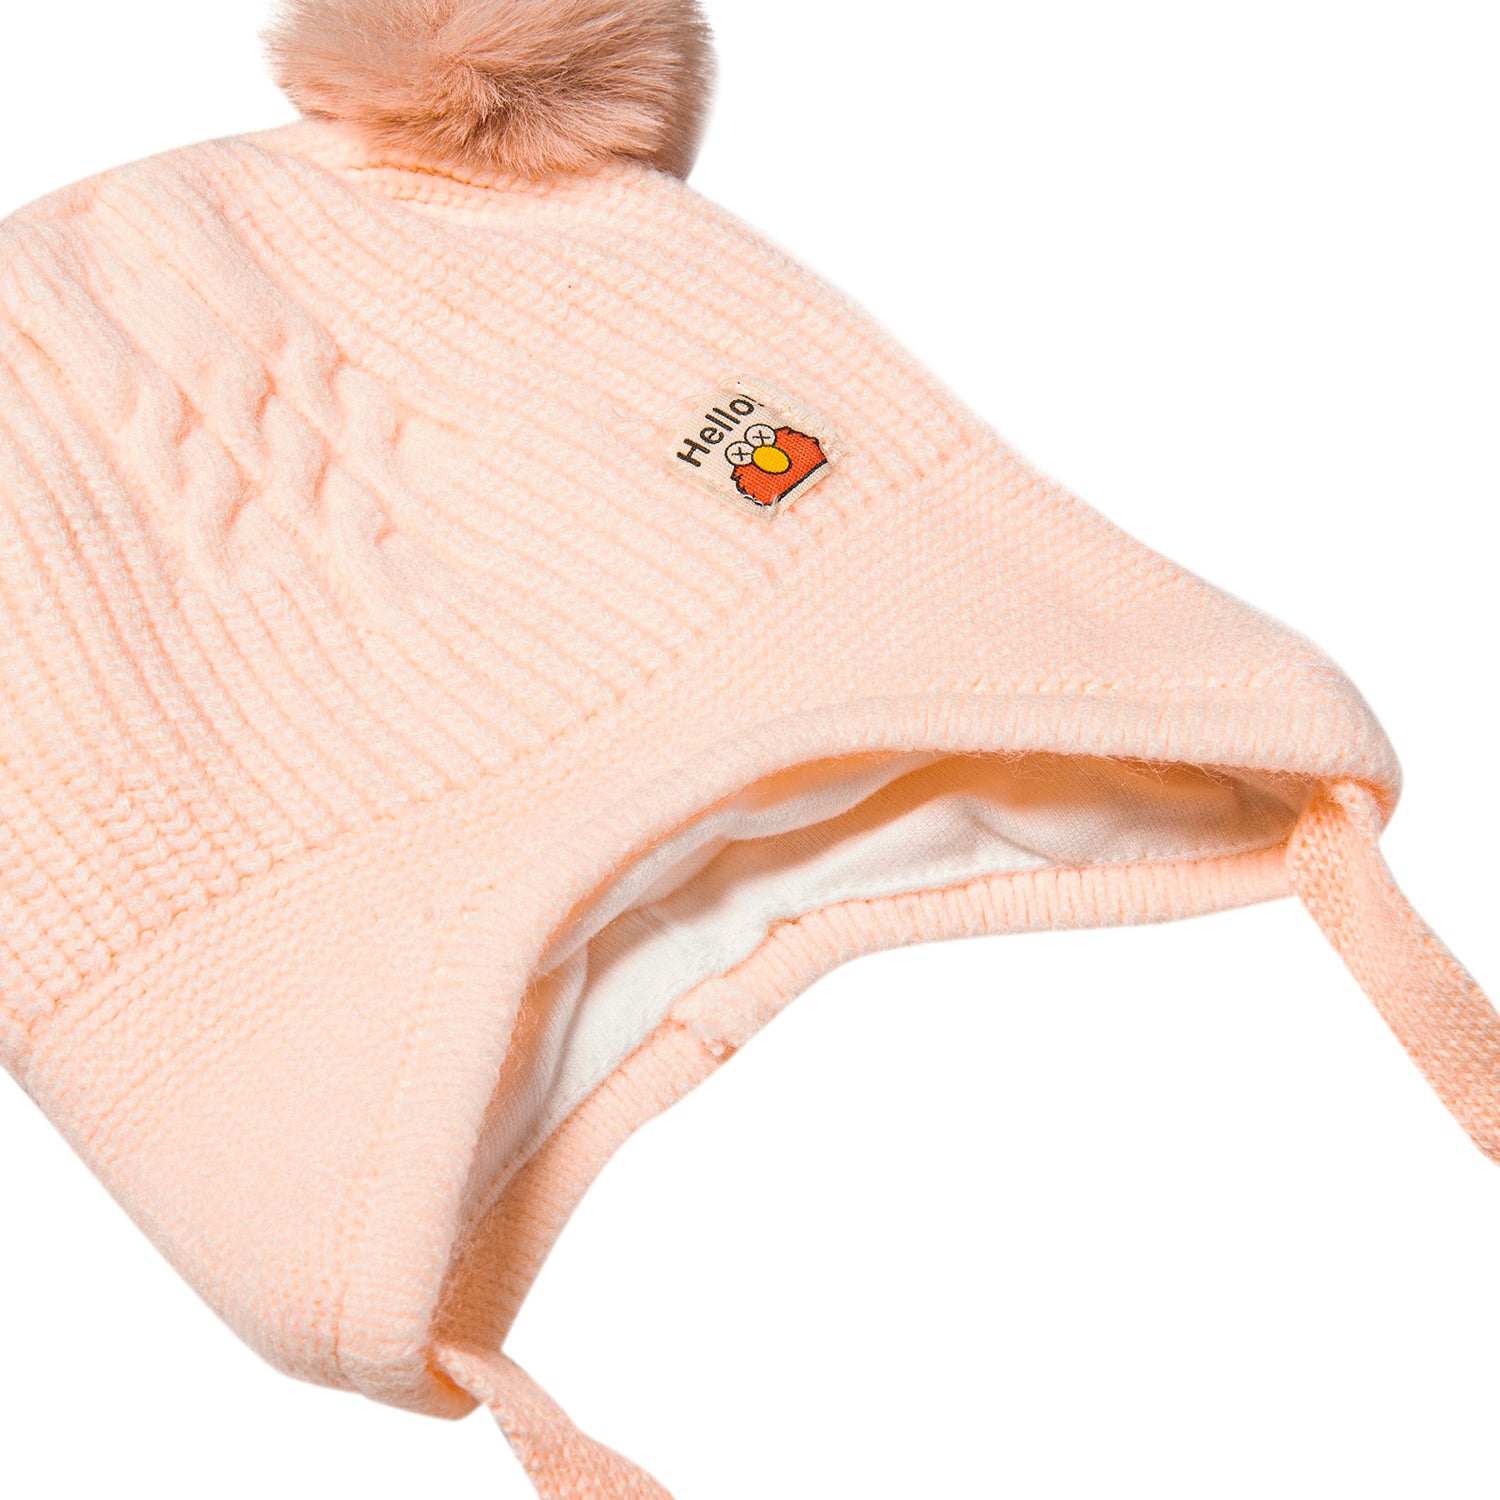 Knit Woollen Cap With Tie Knot For Ear Protection Solid Peach - Baby Moo